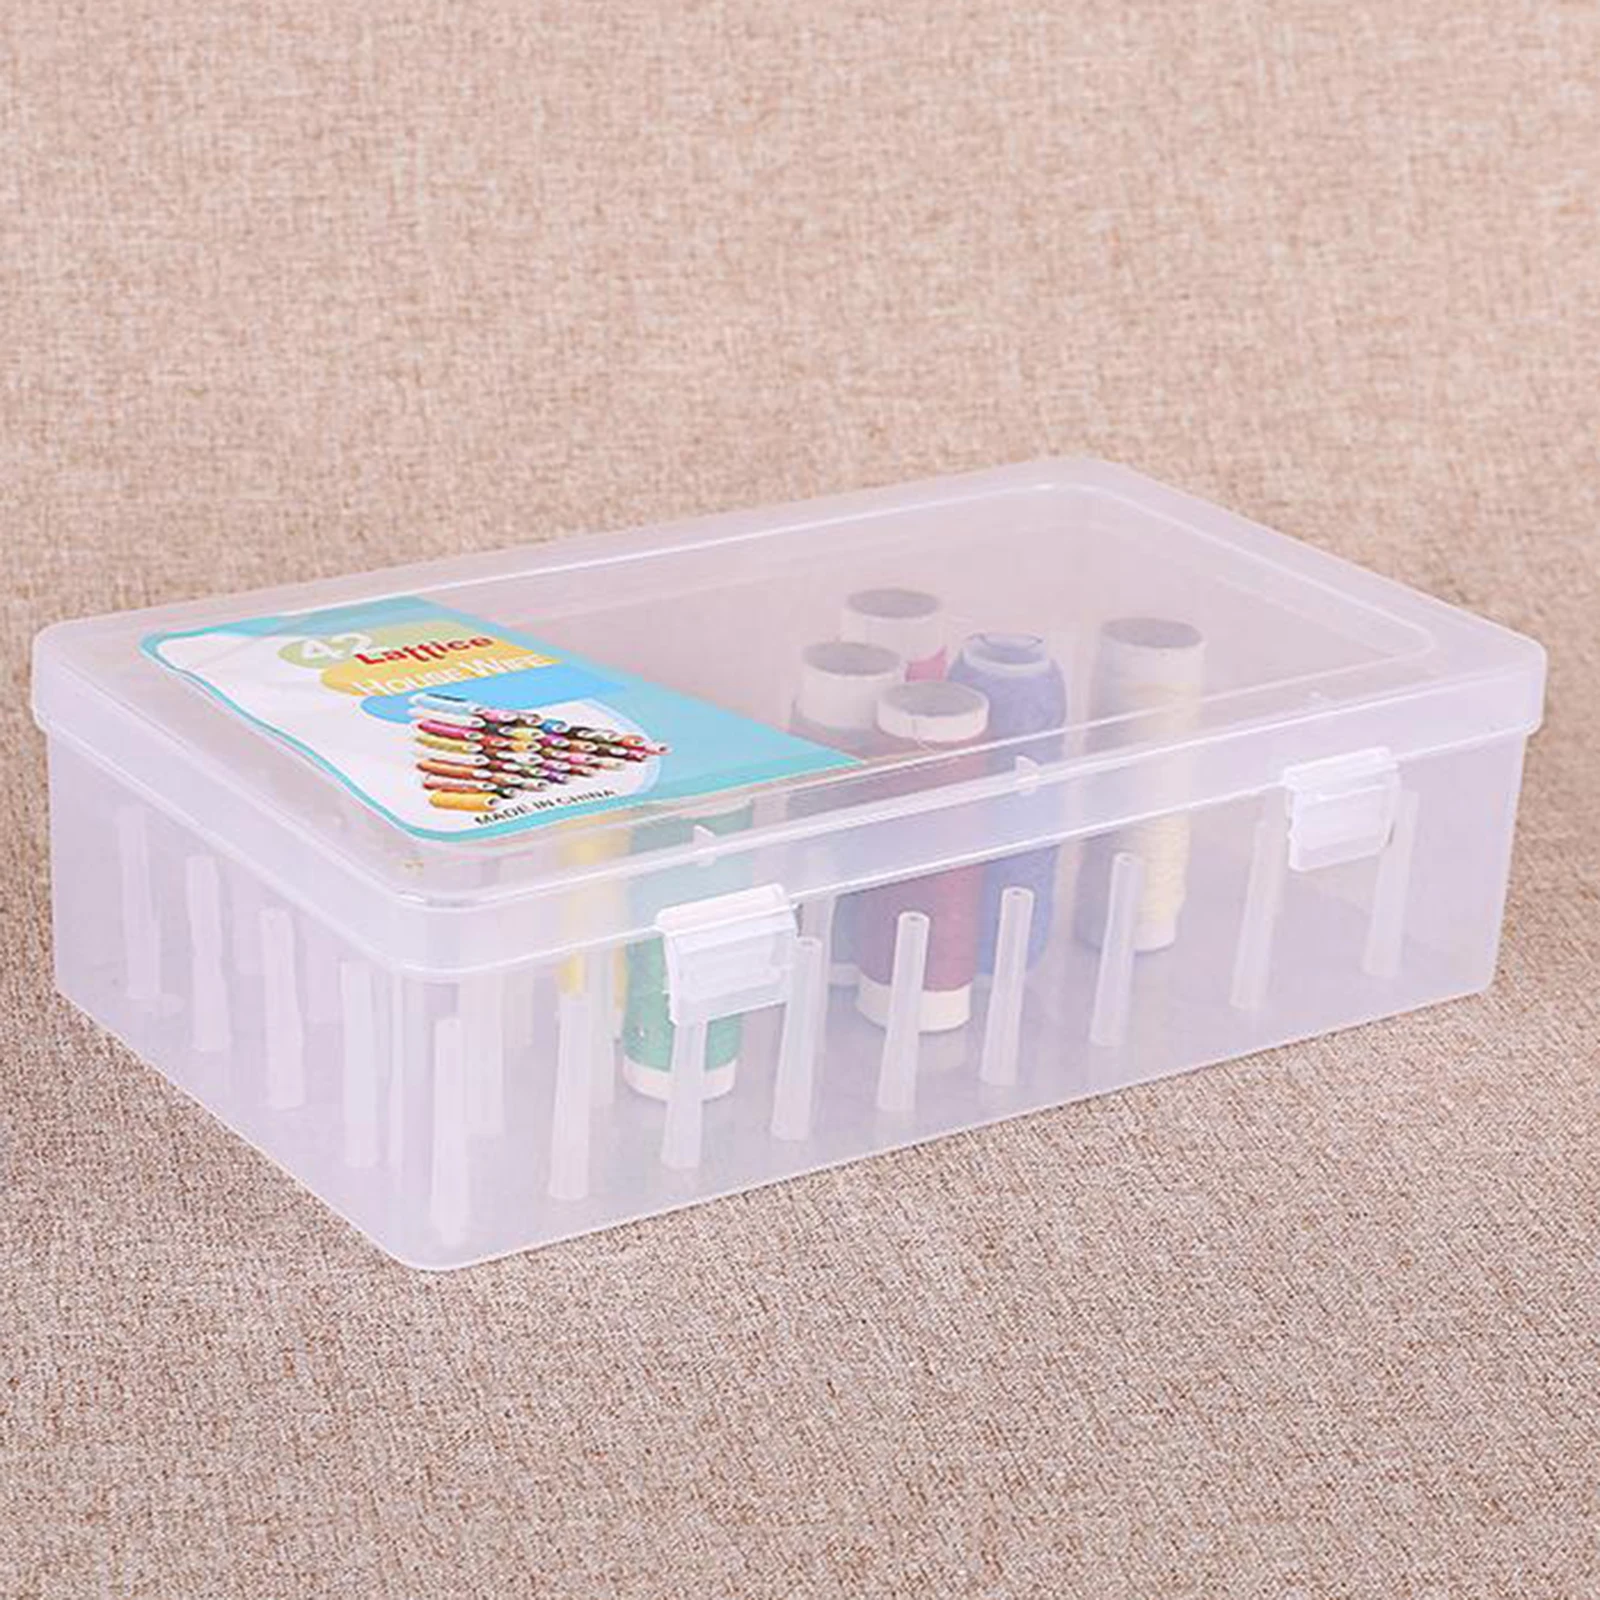 

Empty Sewing Threads Box 9.33x5.4x2.6 inch Durable Sewing Yarn Spools Containers